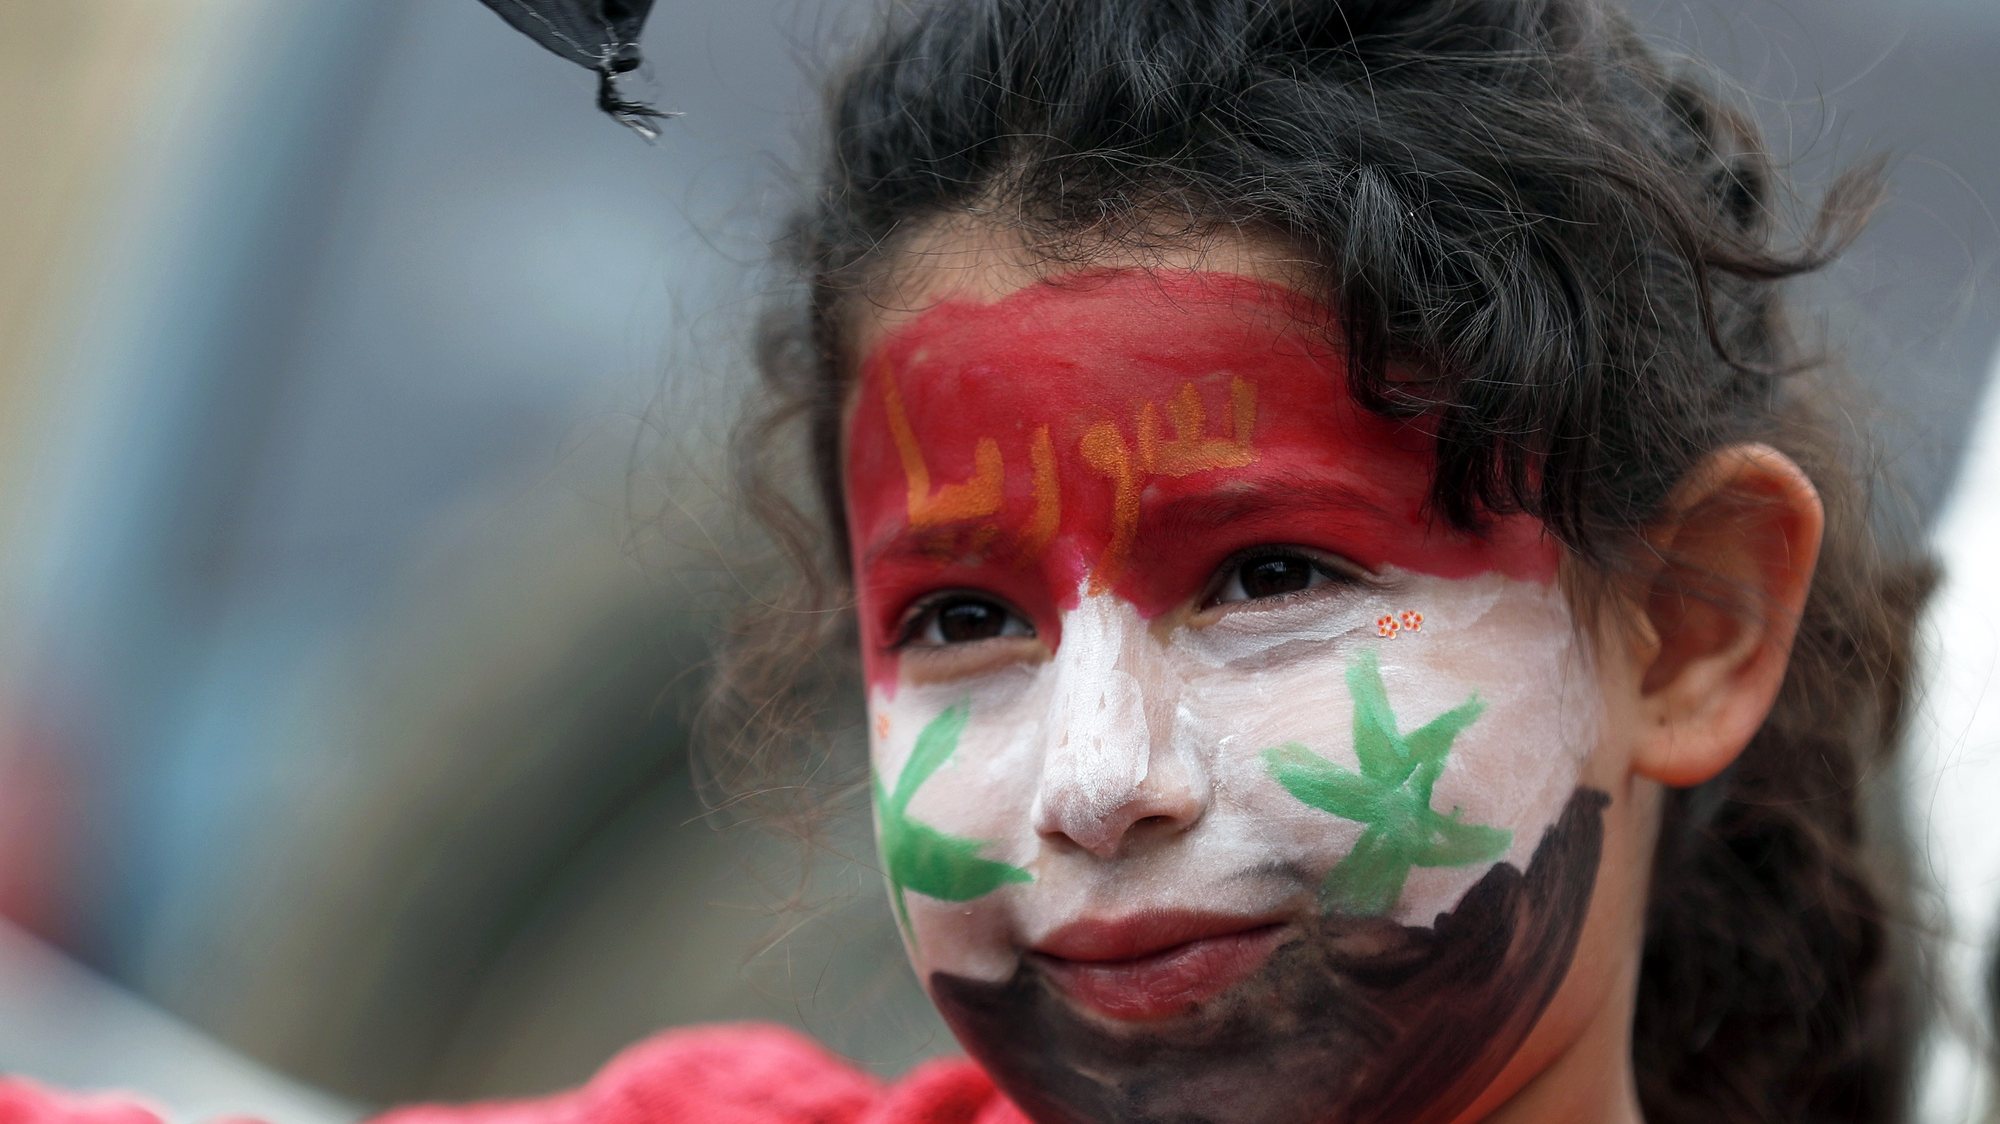 epa07458517 A young Druze girl with her face painted in Syrian flag attends a protest against US President Trump announcements to Recognize Israel&#039;s Sovereignty over Occupied Golan Heights, in the Druze village of Majdal Shams, located on the Israeli-Syrian border, 23 March 2019. US President Trump said in a tweet on 21 March 2019, that &#039;it is time for the United States to fully recognize Israel&#039;s Sovereignty over the Golan Heights&#039; adding that it is of &#039;critical strategic and security importance to the State of Israel and Regional Stability.&#039; Israel captured much of the Golan region from Syria in 1967 and then annexed it in 1981, a move that was never international recognized. Trump&#039;s remarks came as US Secretary of State Pompeo is on a trip in the Middle East and visited Jerusalem on the day.  EPA/ATEF SAFADI